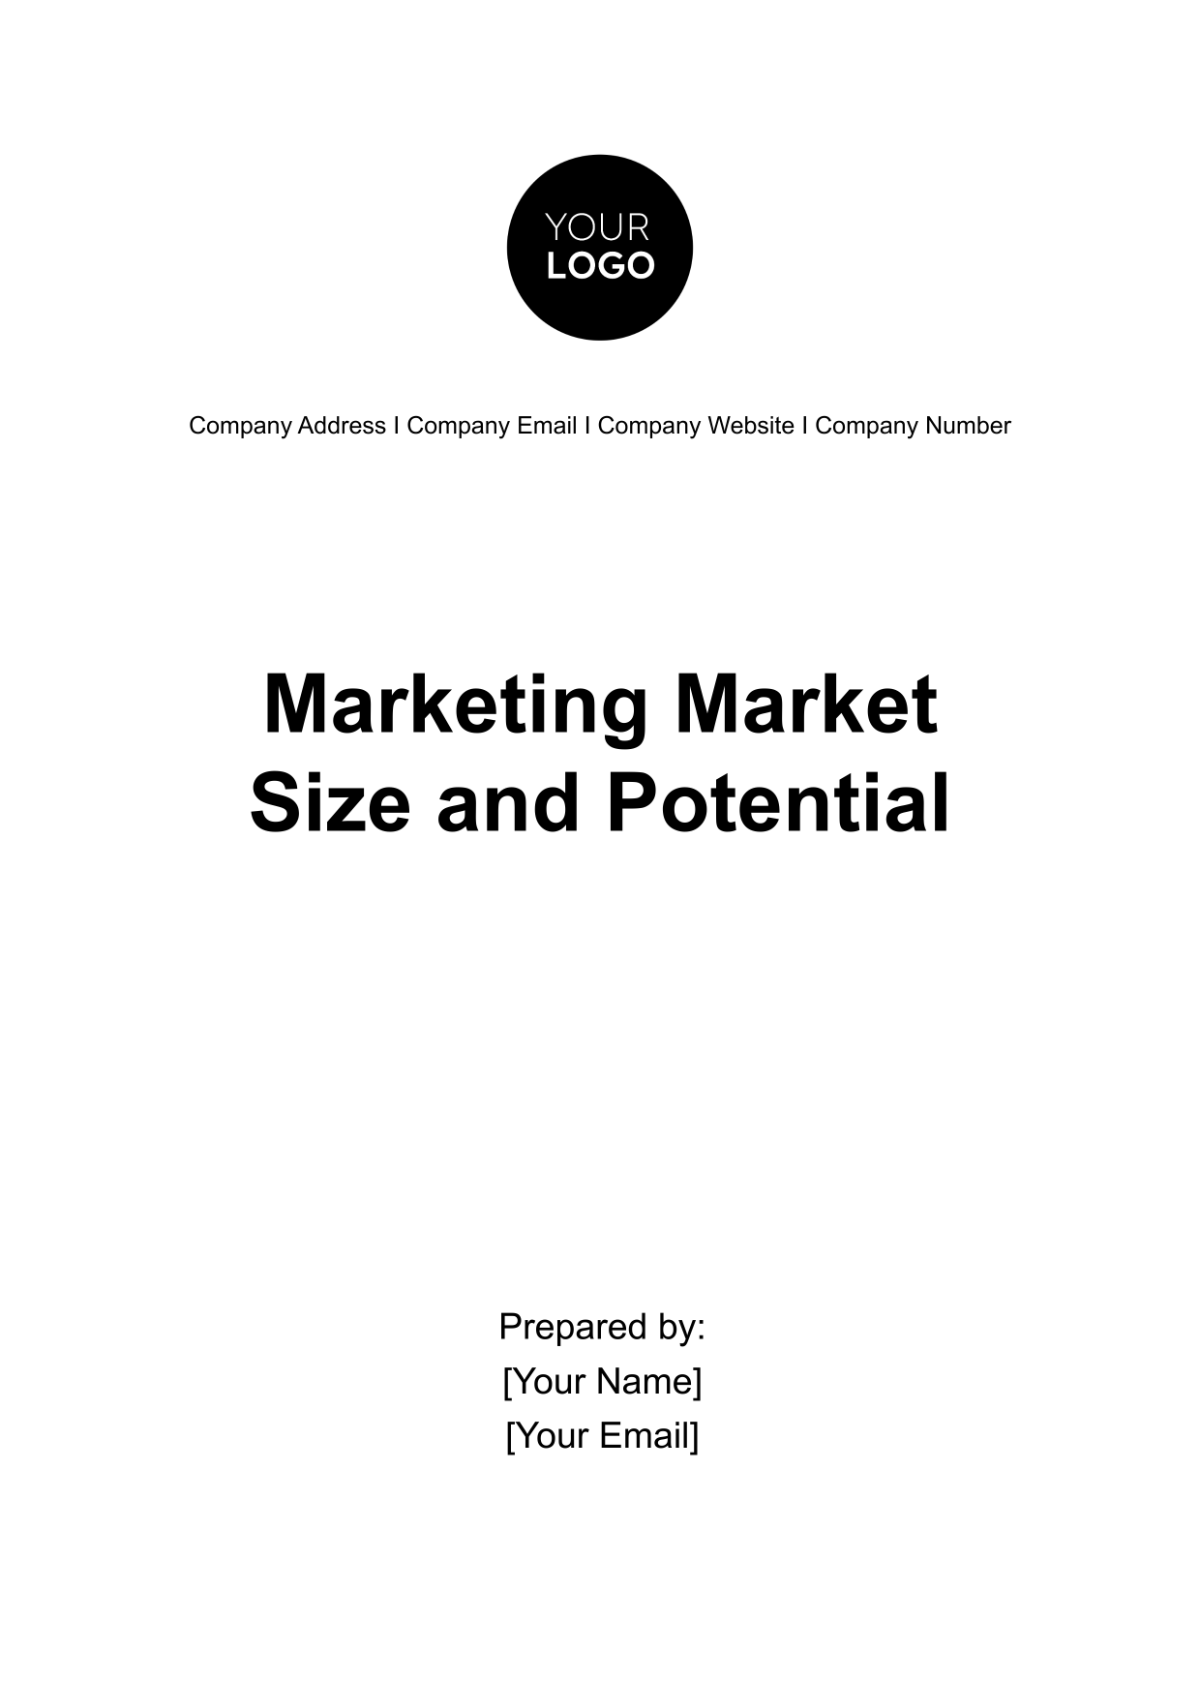 Marketing Market Size and Potential Template